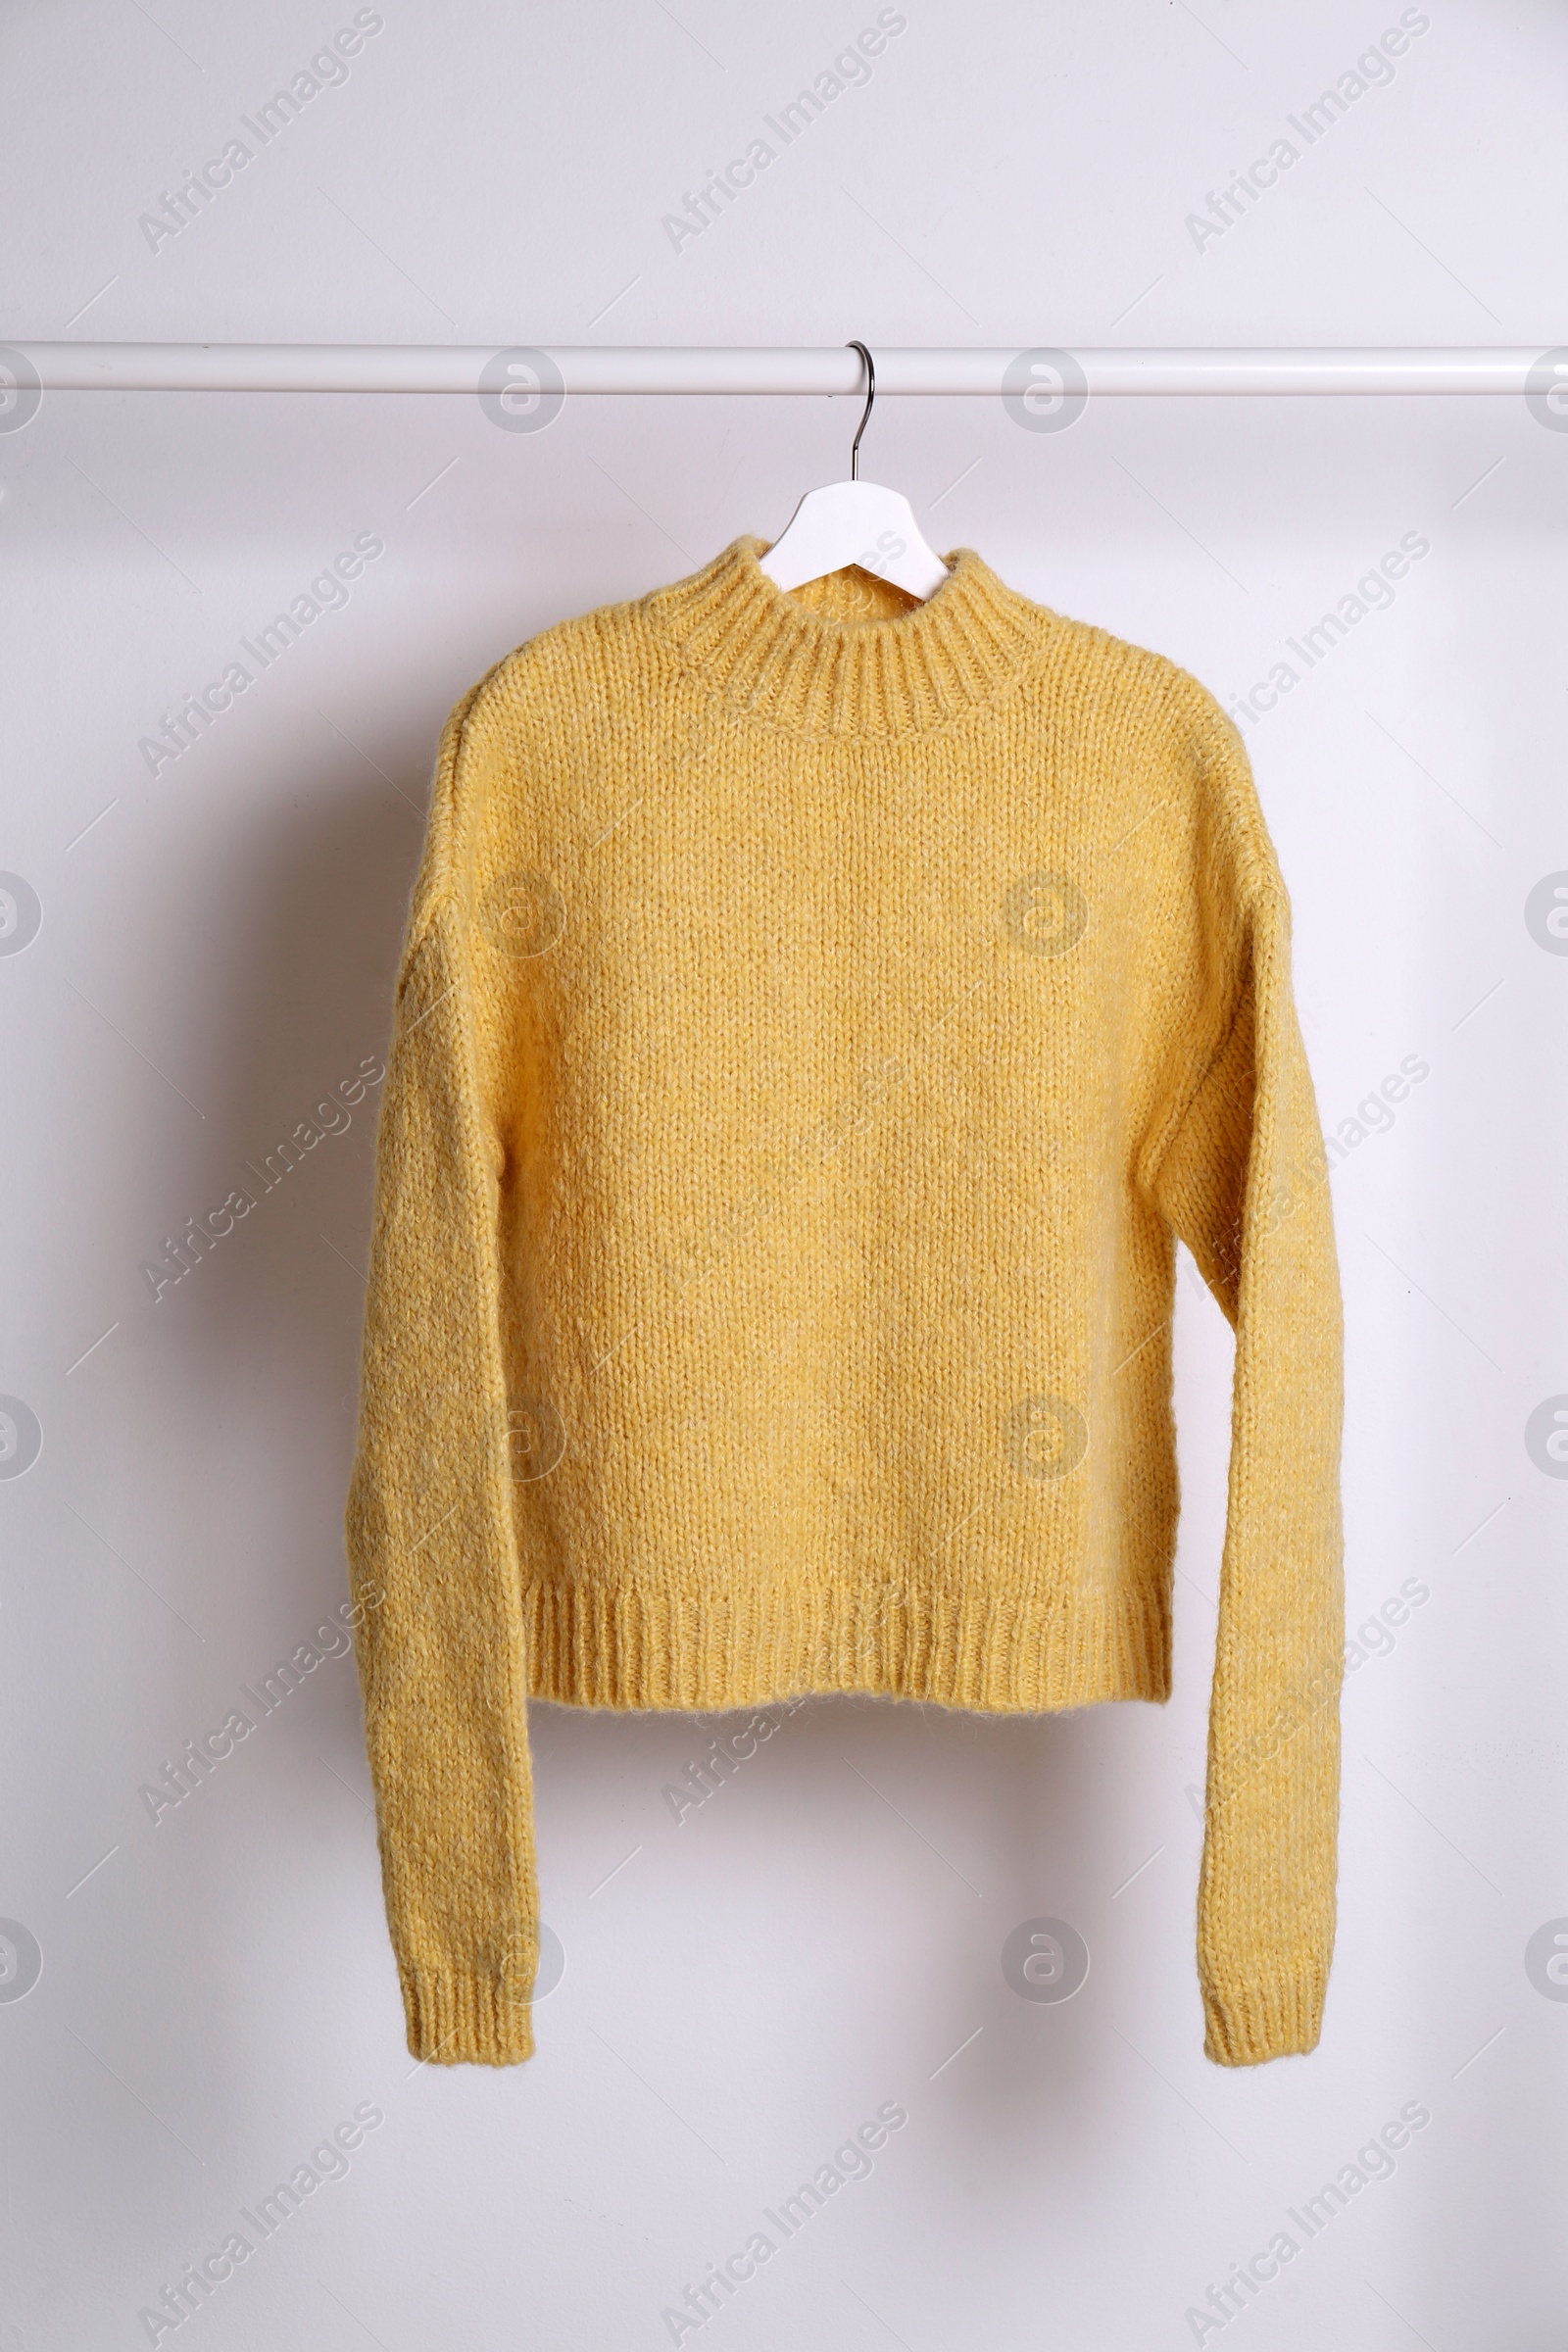 Photo of Warm sweater hanging on rack against white background